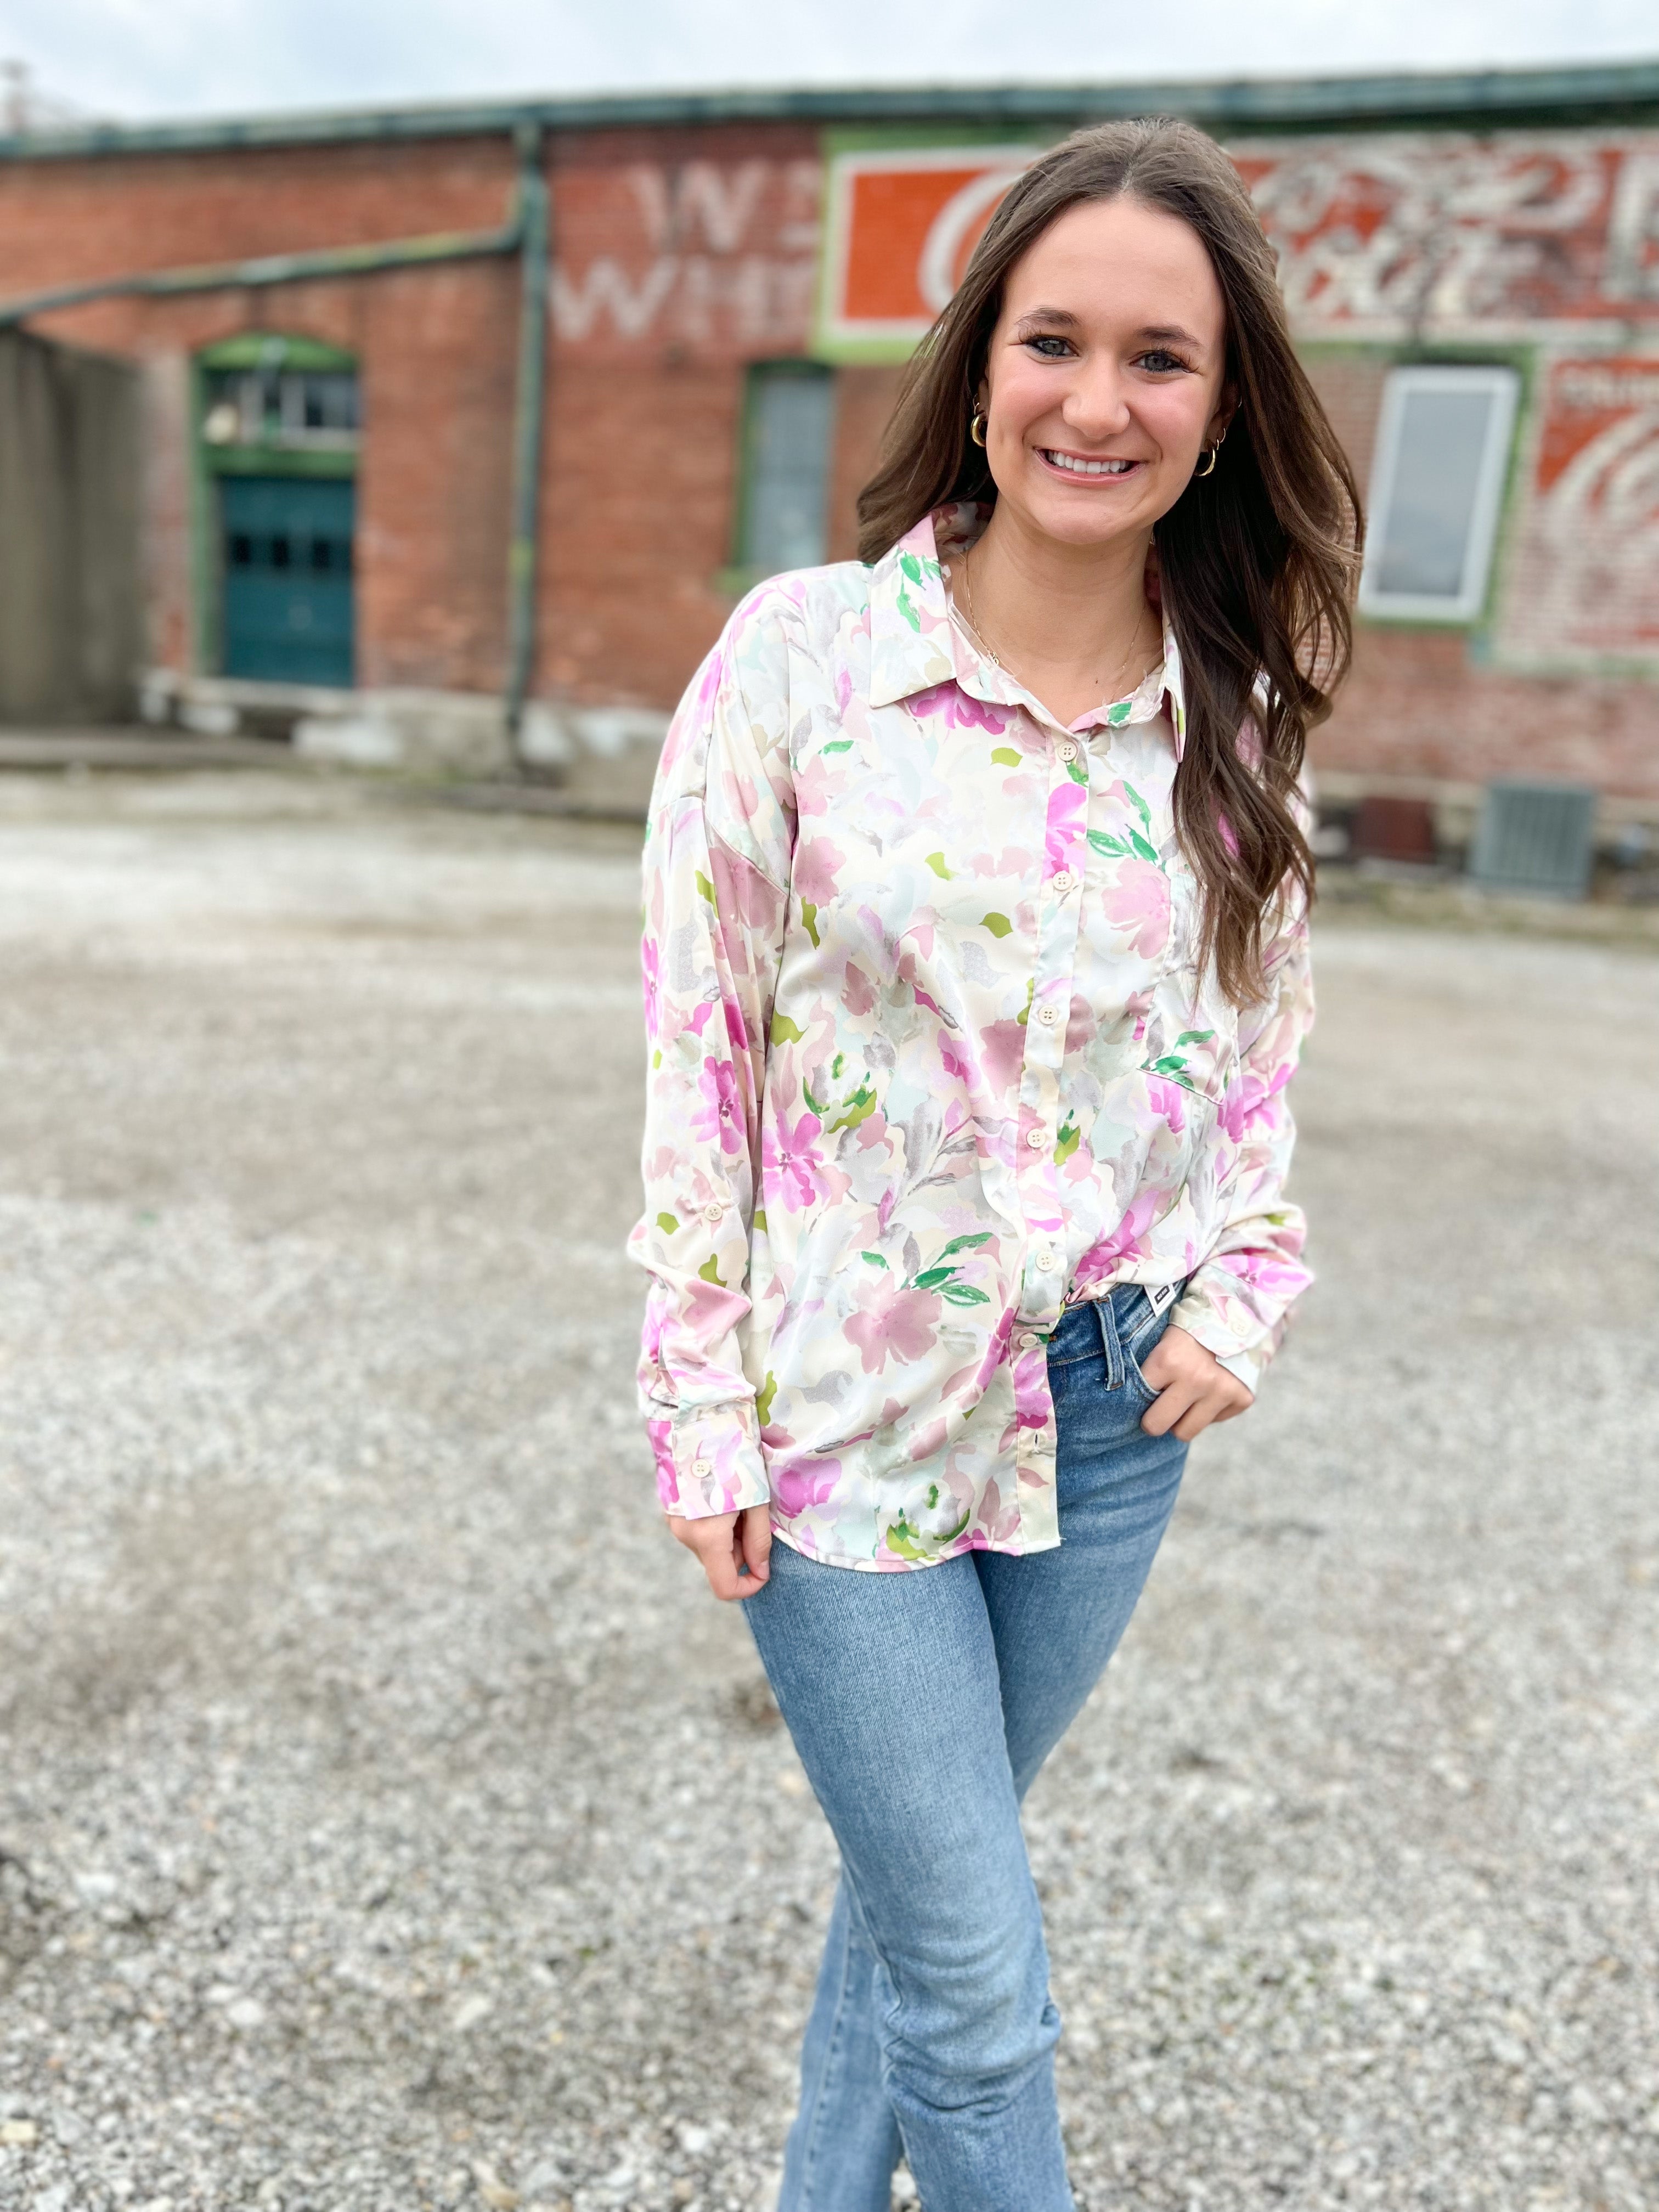 FLORAL SATIN BUTTON UP TOP